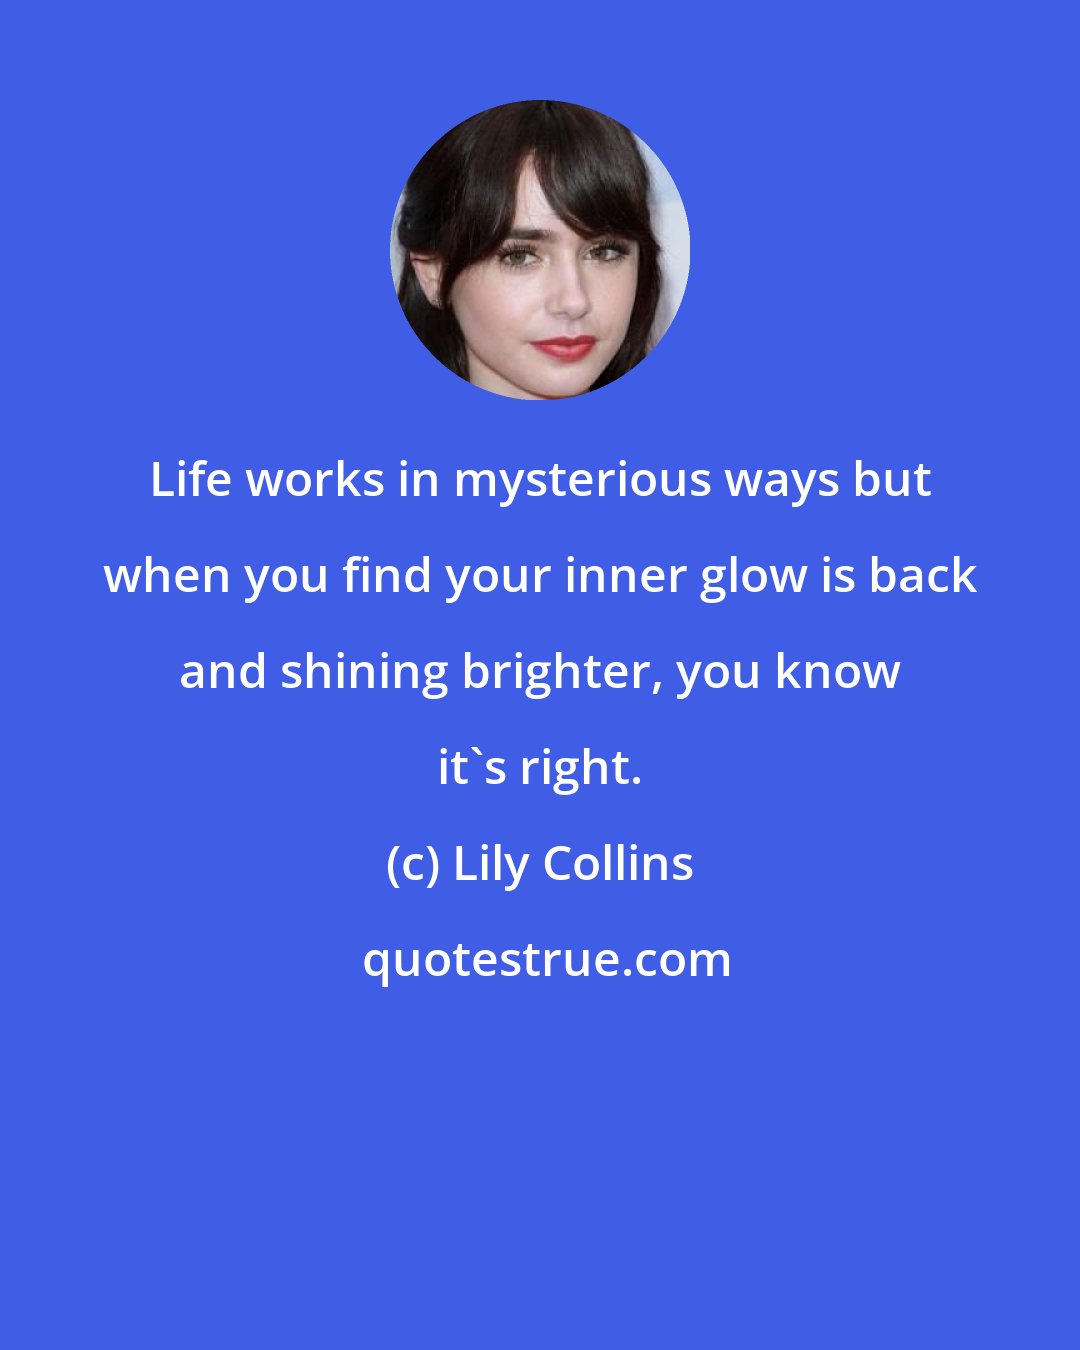 Lily Collins: Life works in mysterious ways but when you find your inner glow is back and shining brighter, you know it's right.